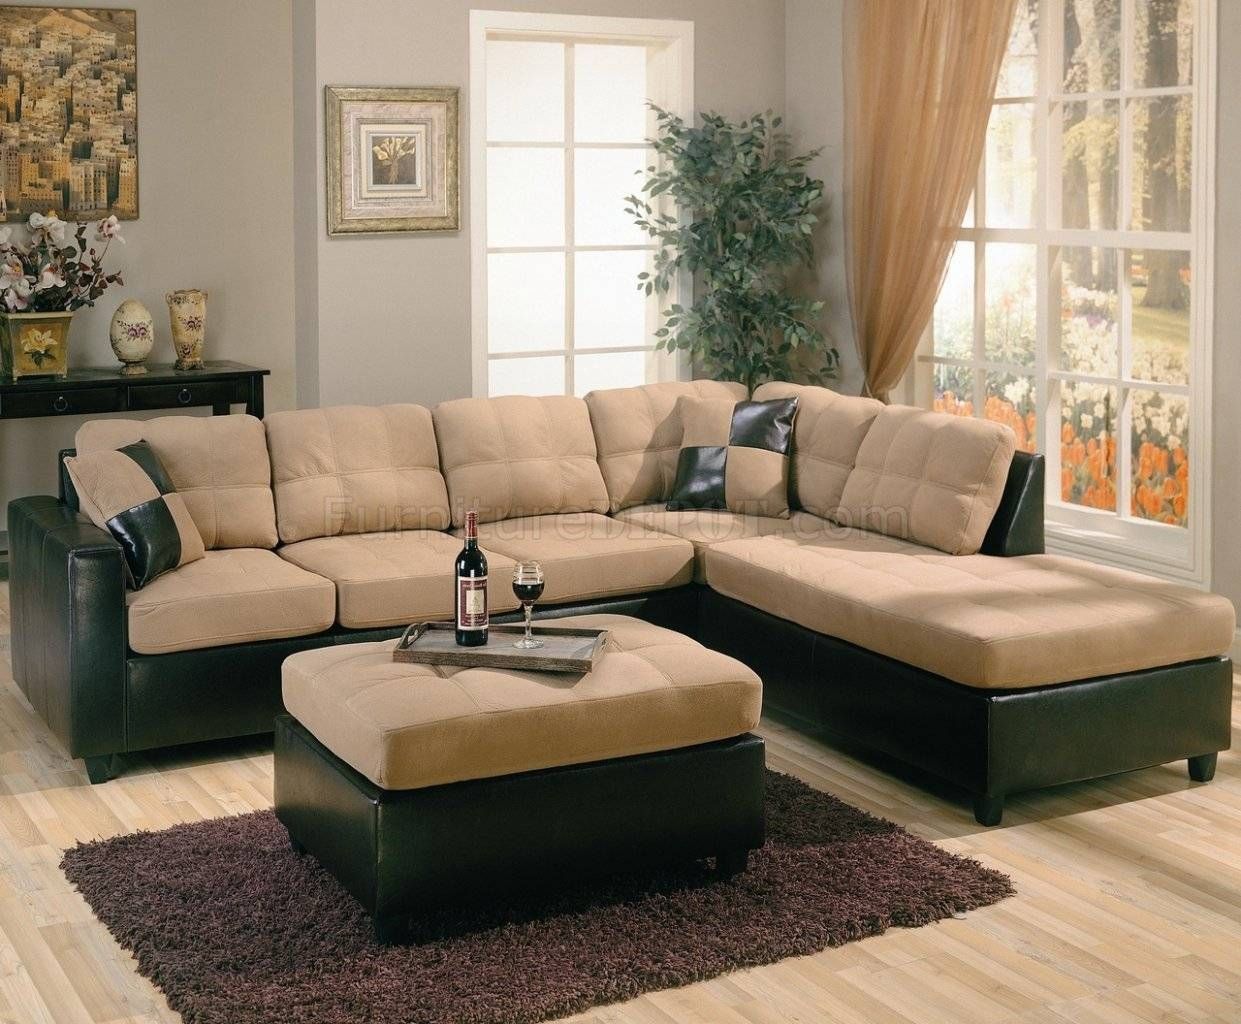 Two Tone Tan Microfiber & Dark Brown Faux Leather Sectional Sofa With Regard To Faux Leather Sectional Sofas (View 6 of 25)